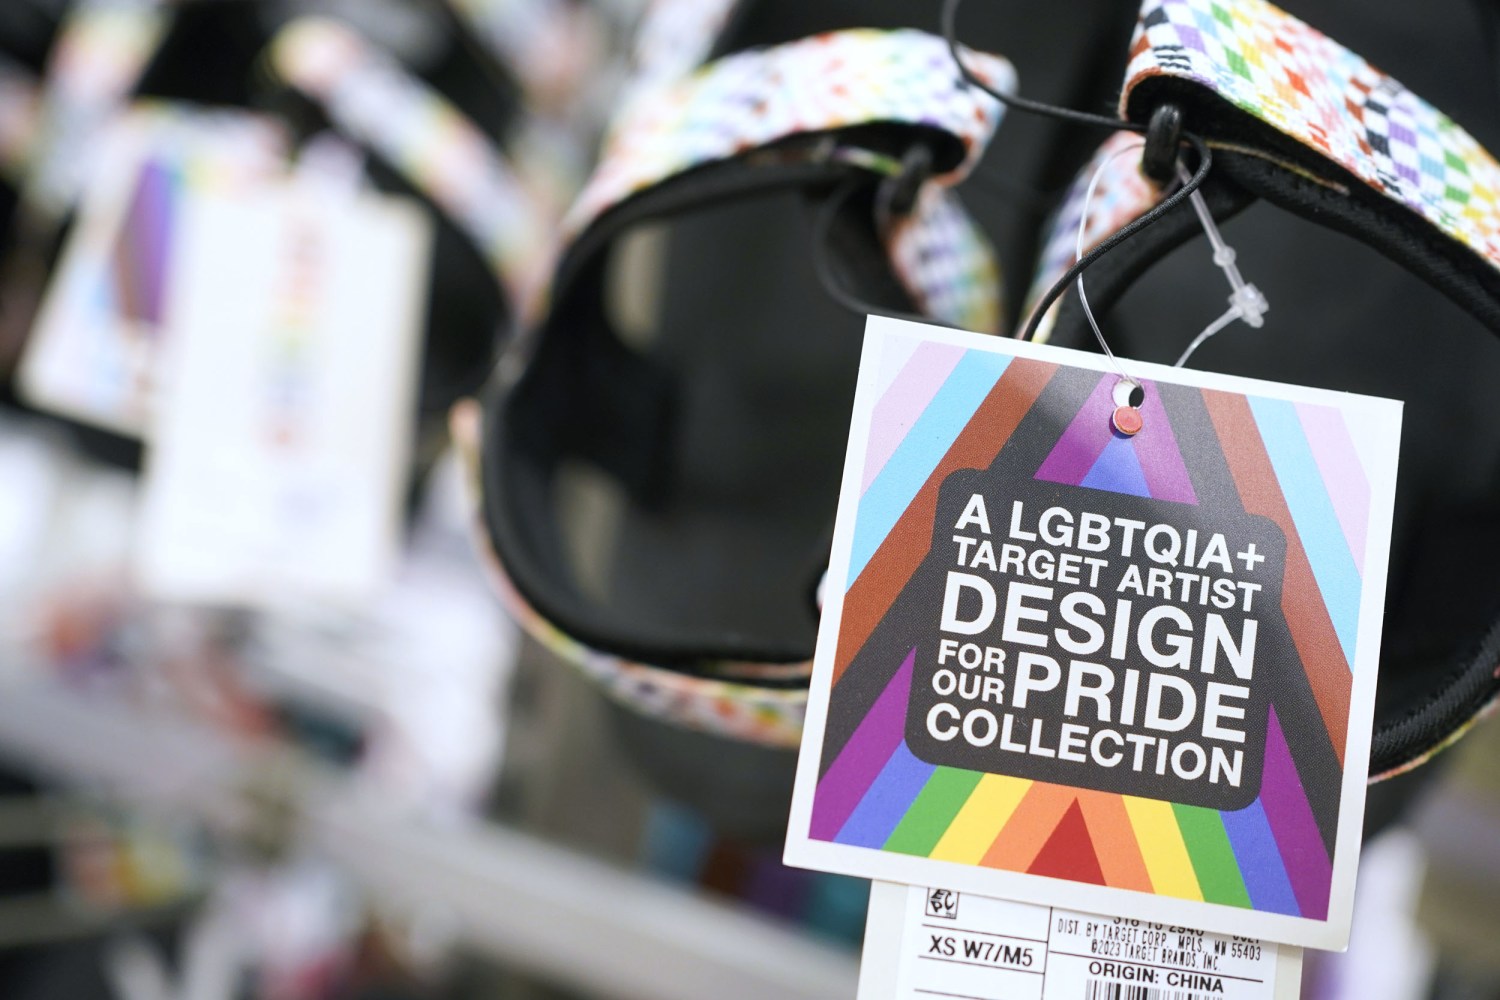 Pride merch toxic for brands? Why we can't let the right win this war